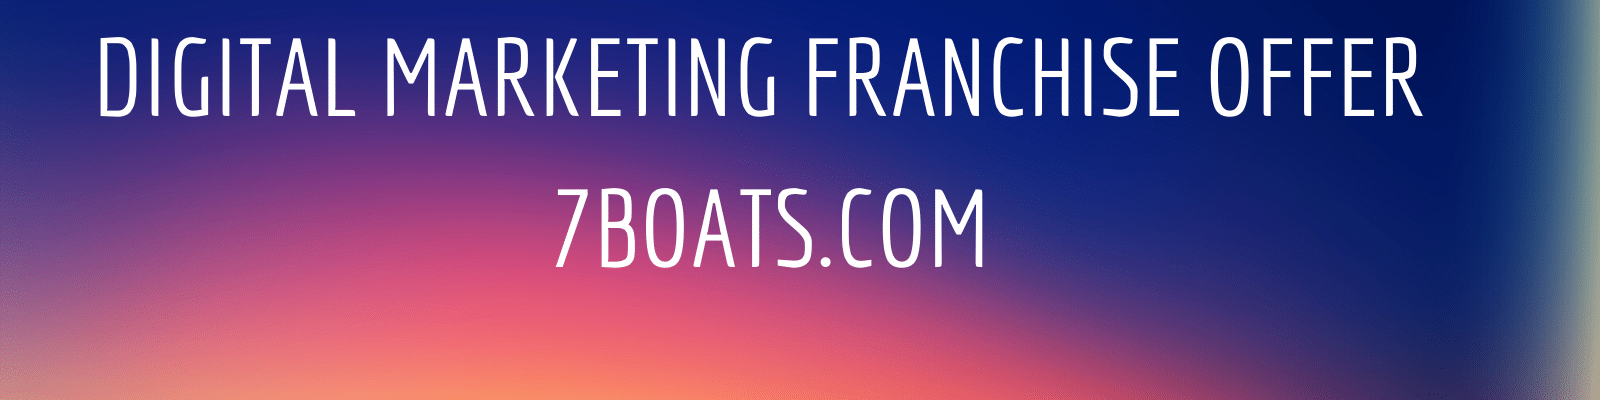 digital marketing franchise offer from 7boats